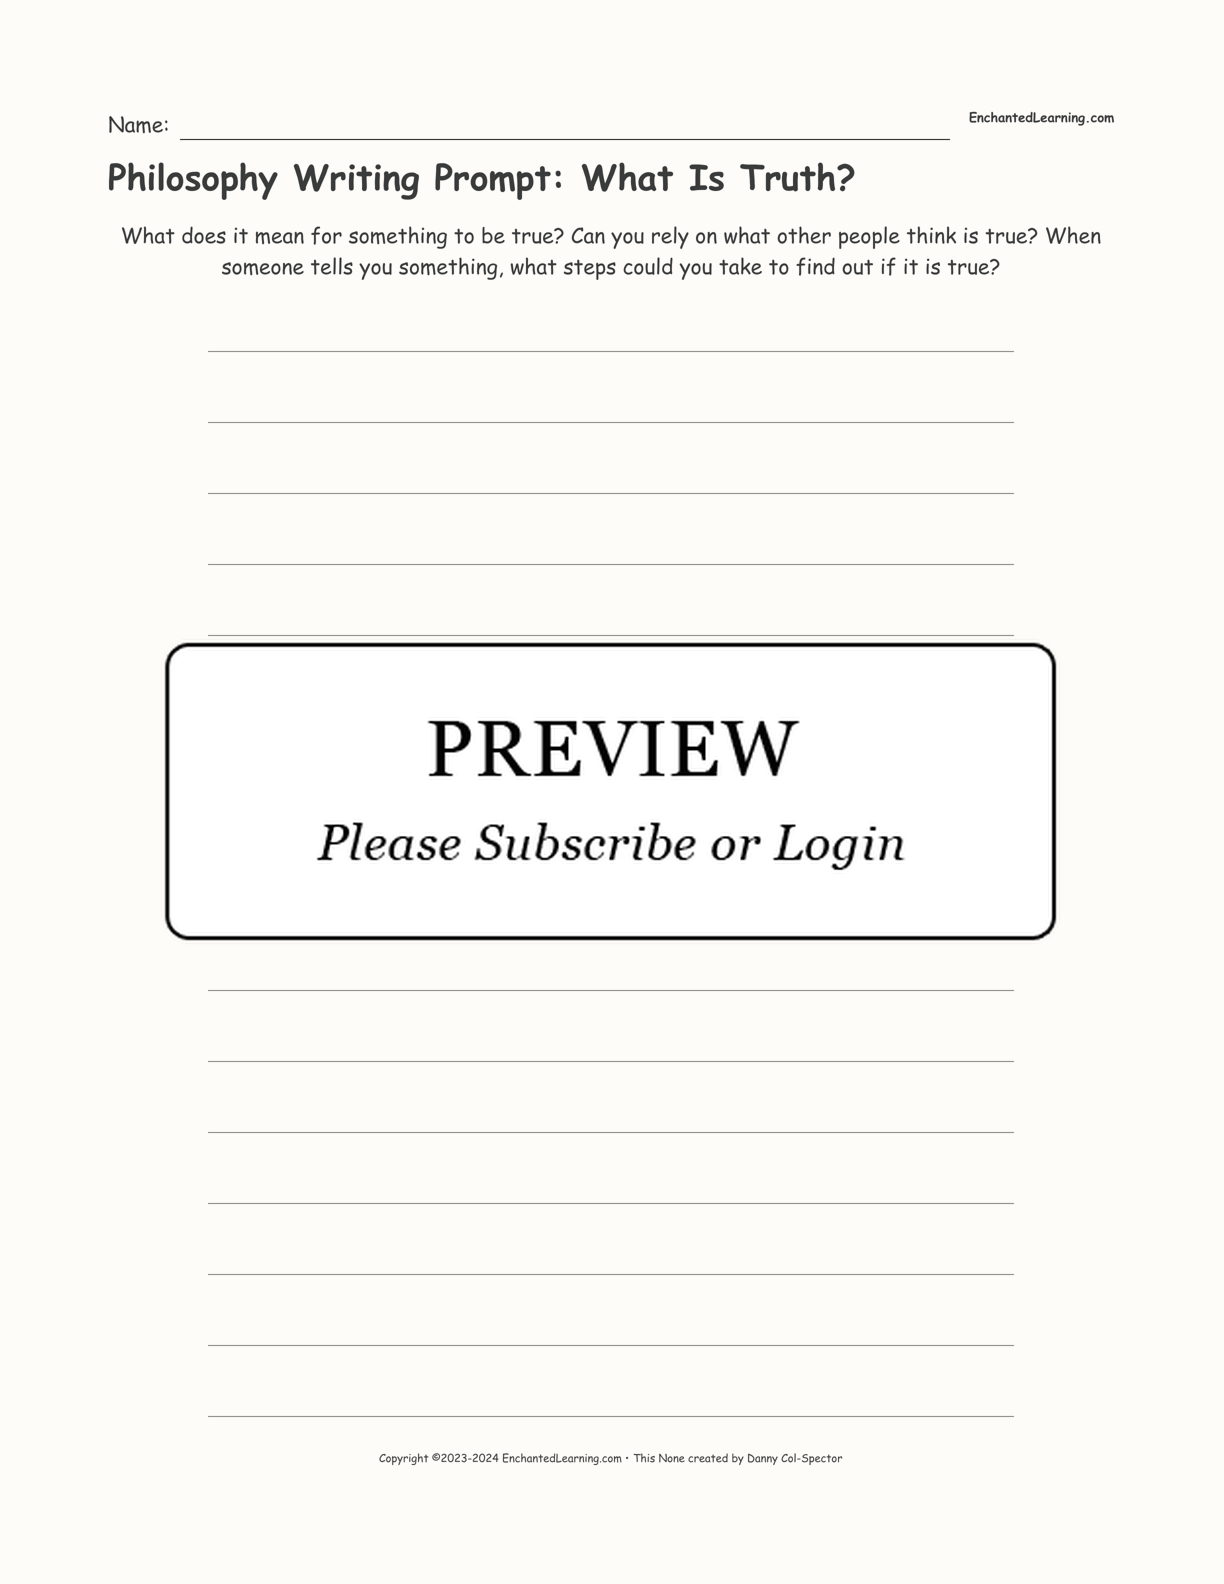 Philosophy Writing Prompt: What is Truth? interactive printout page 1